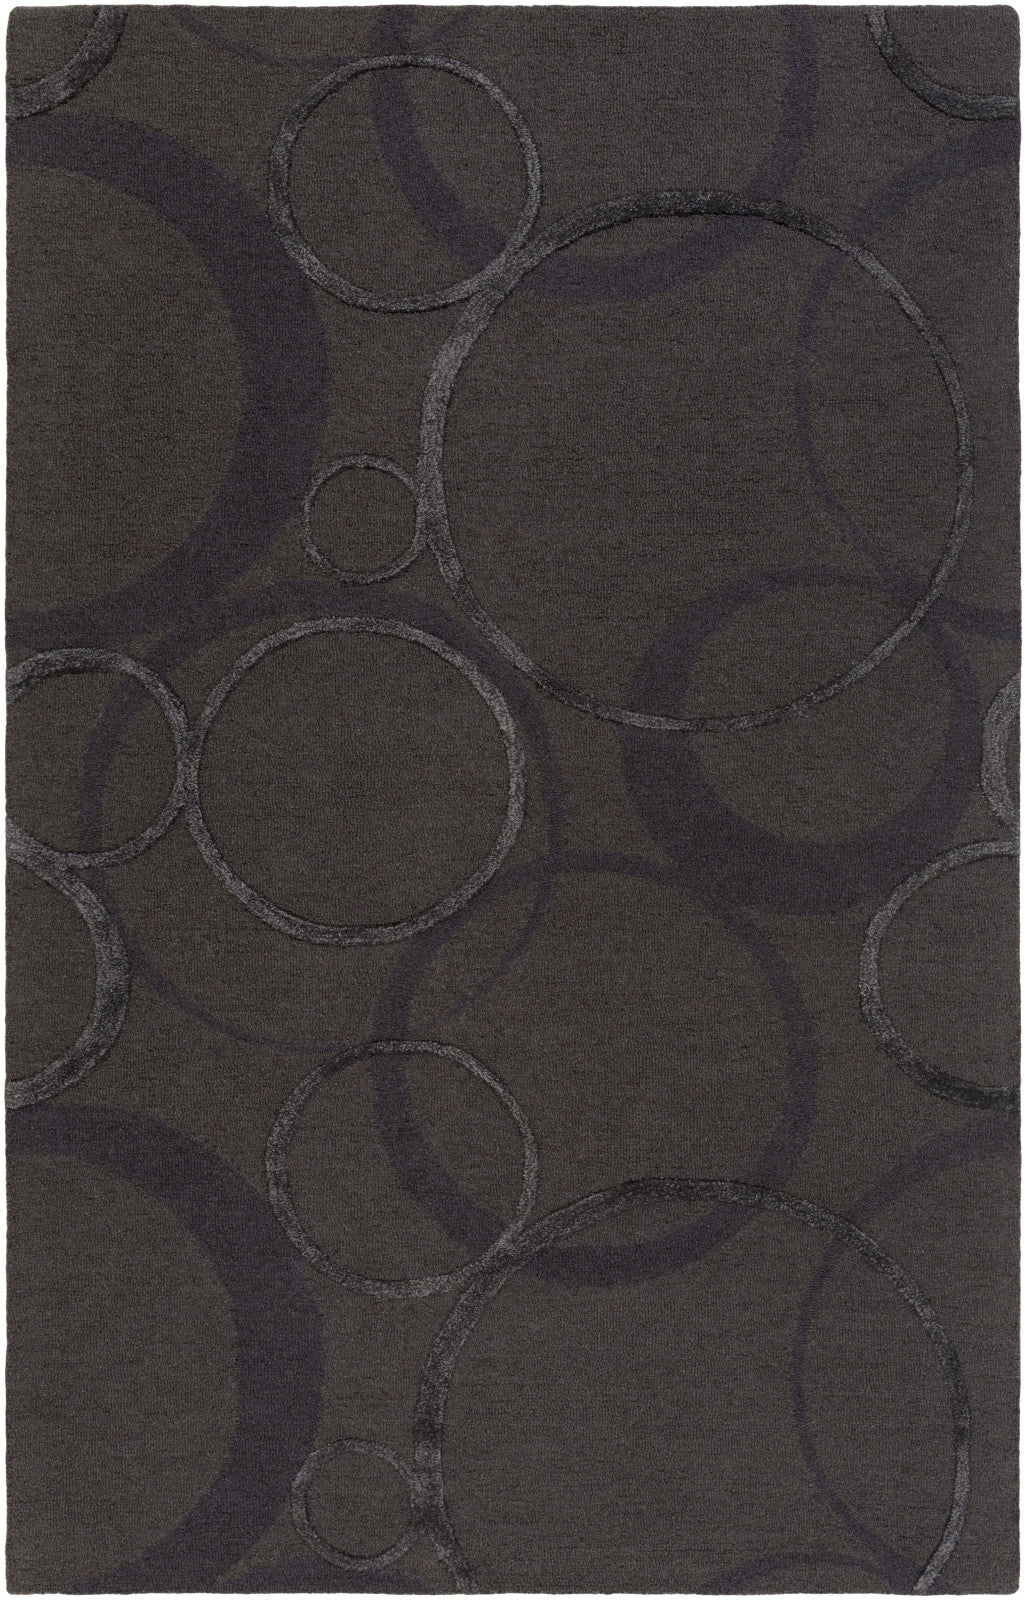 Artistic Weavers Alexander Ross Taupe/Charcoal Area Rug main image